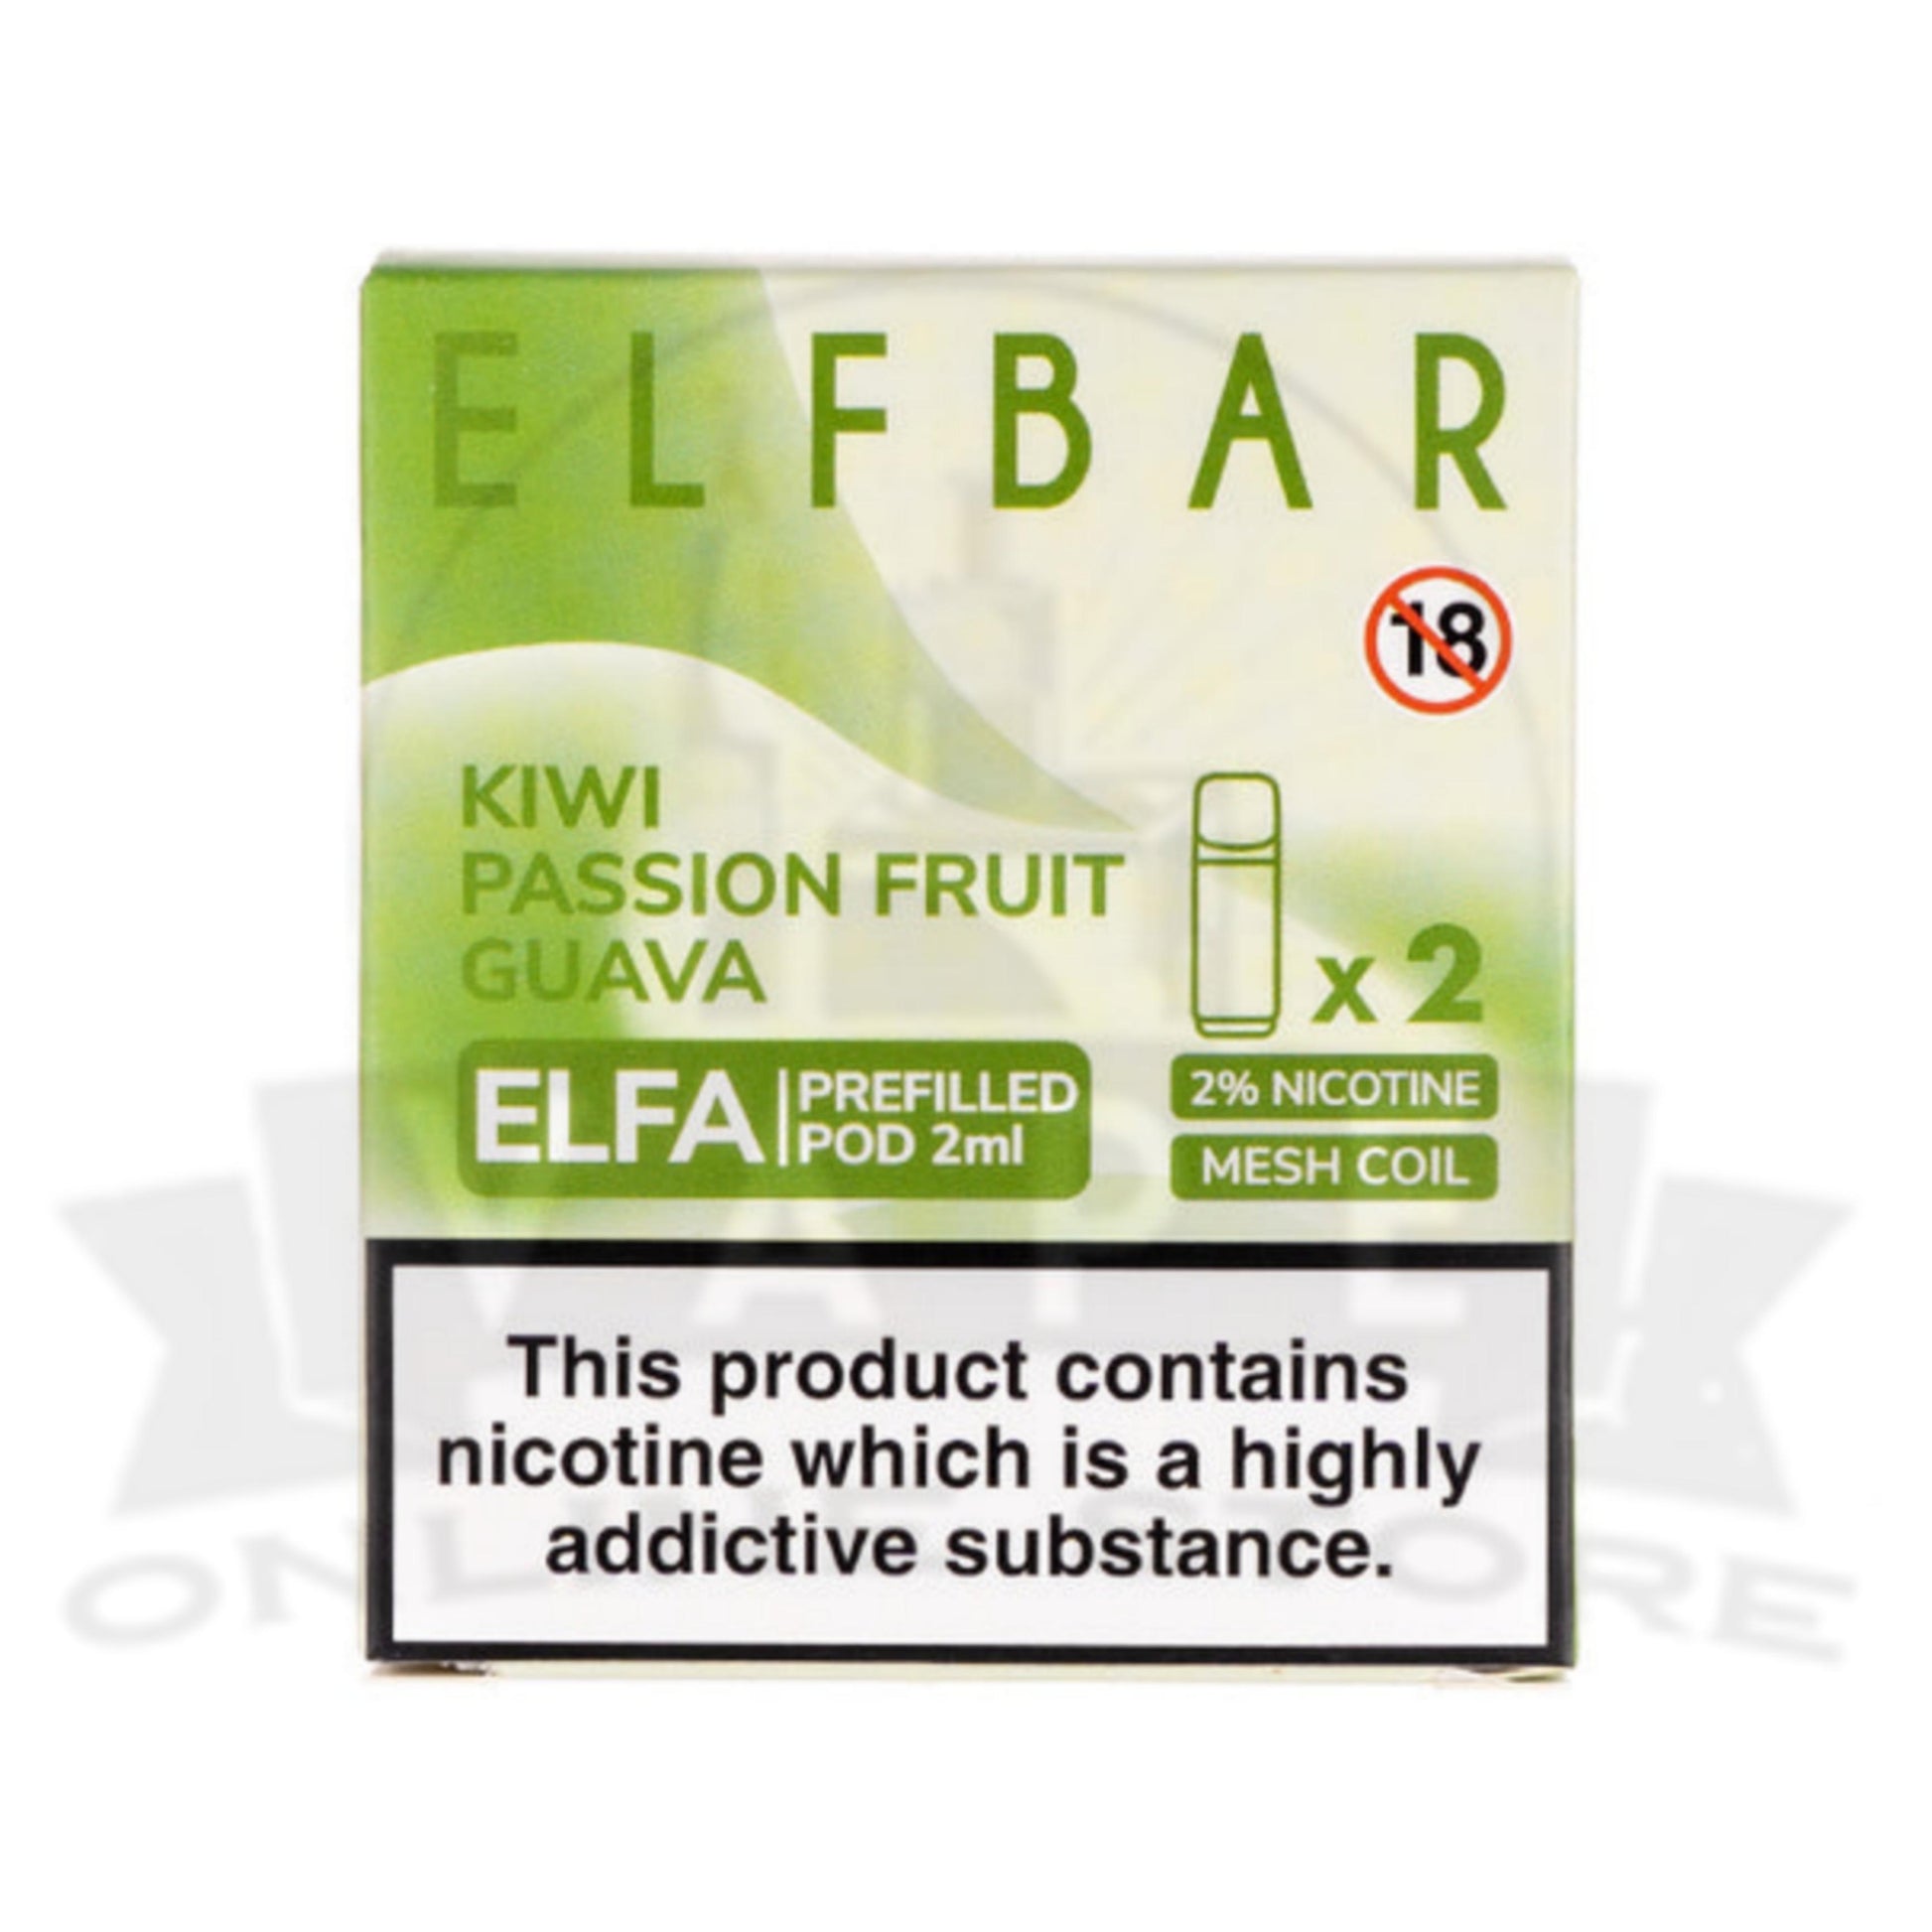 Kiwi Passion Fruit Guava Elfa Pre-filled Pods By Elf Bar